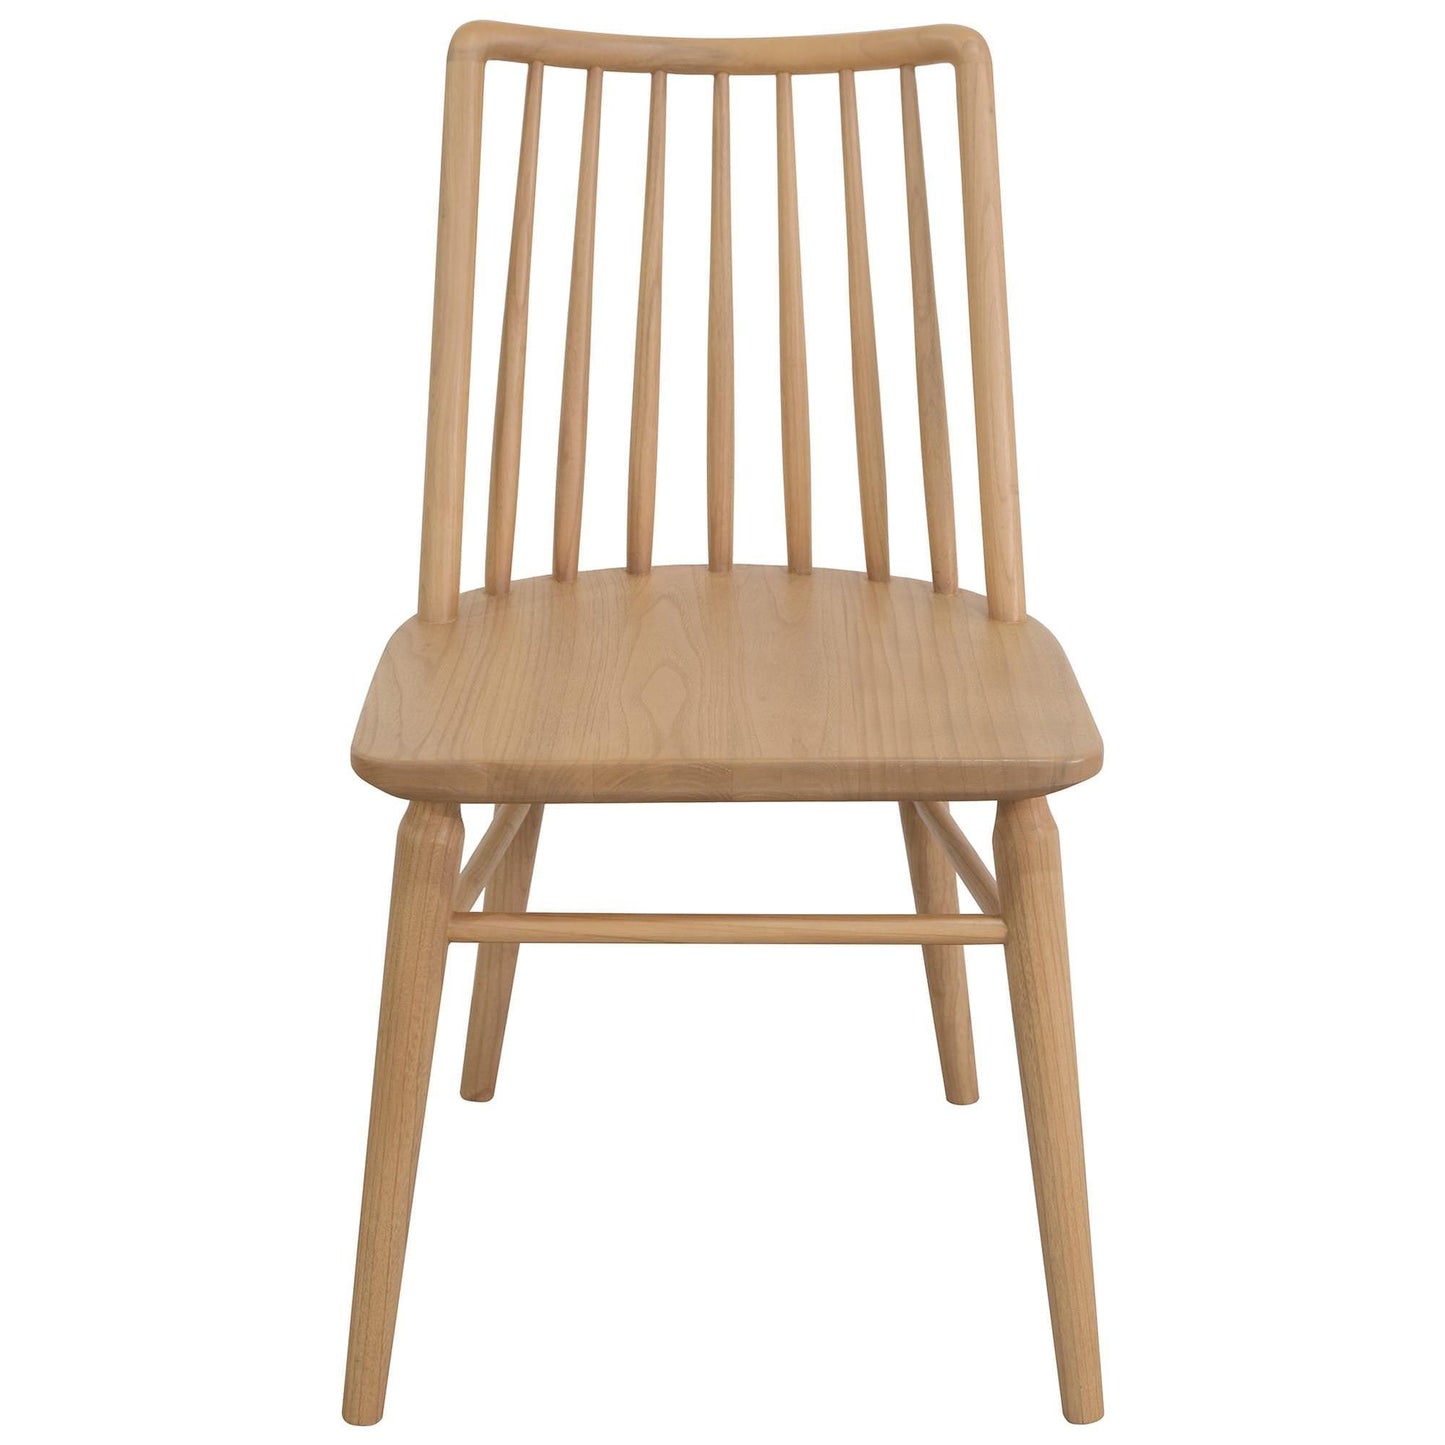 Riviera Solid Oak Dining Chair - Set fo 2 (Natural) - Dining ChairCH 050 RVR Set of 2 (N)754169483524 1